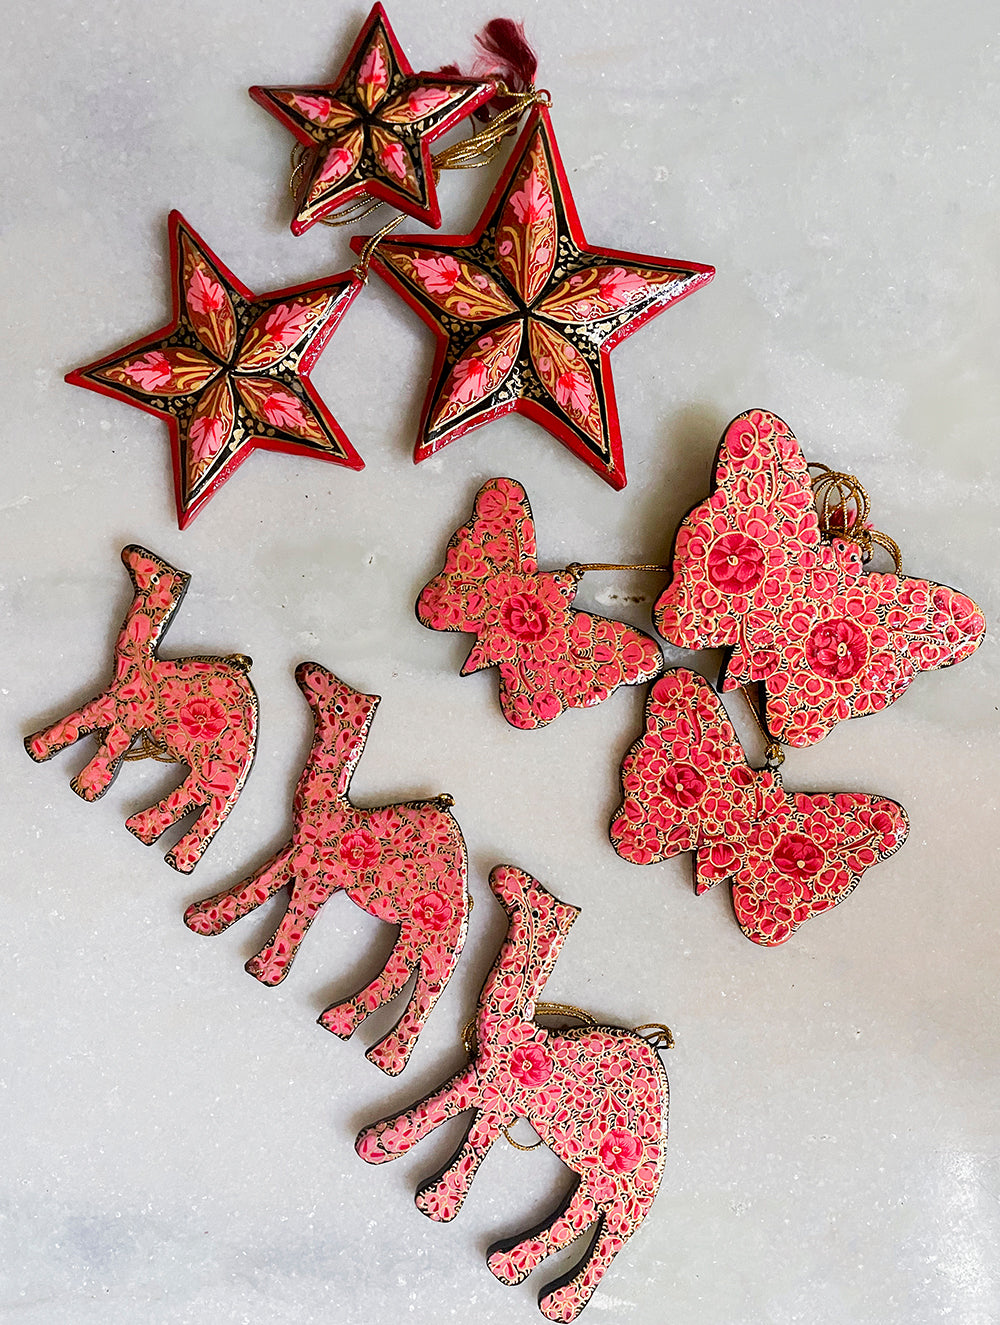 Load image into Gallery viewer, Kashmiri Art Xmas Decorations - Set of 9 (3 Stars, 3 Butterflies, 3 Camels)